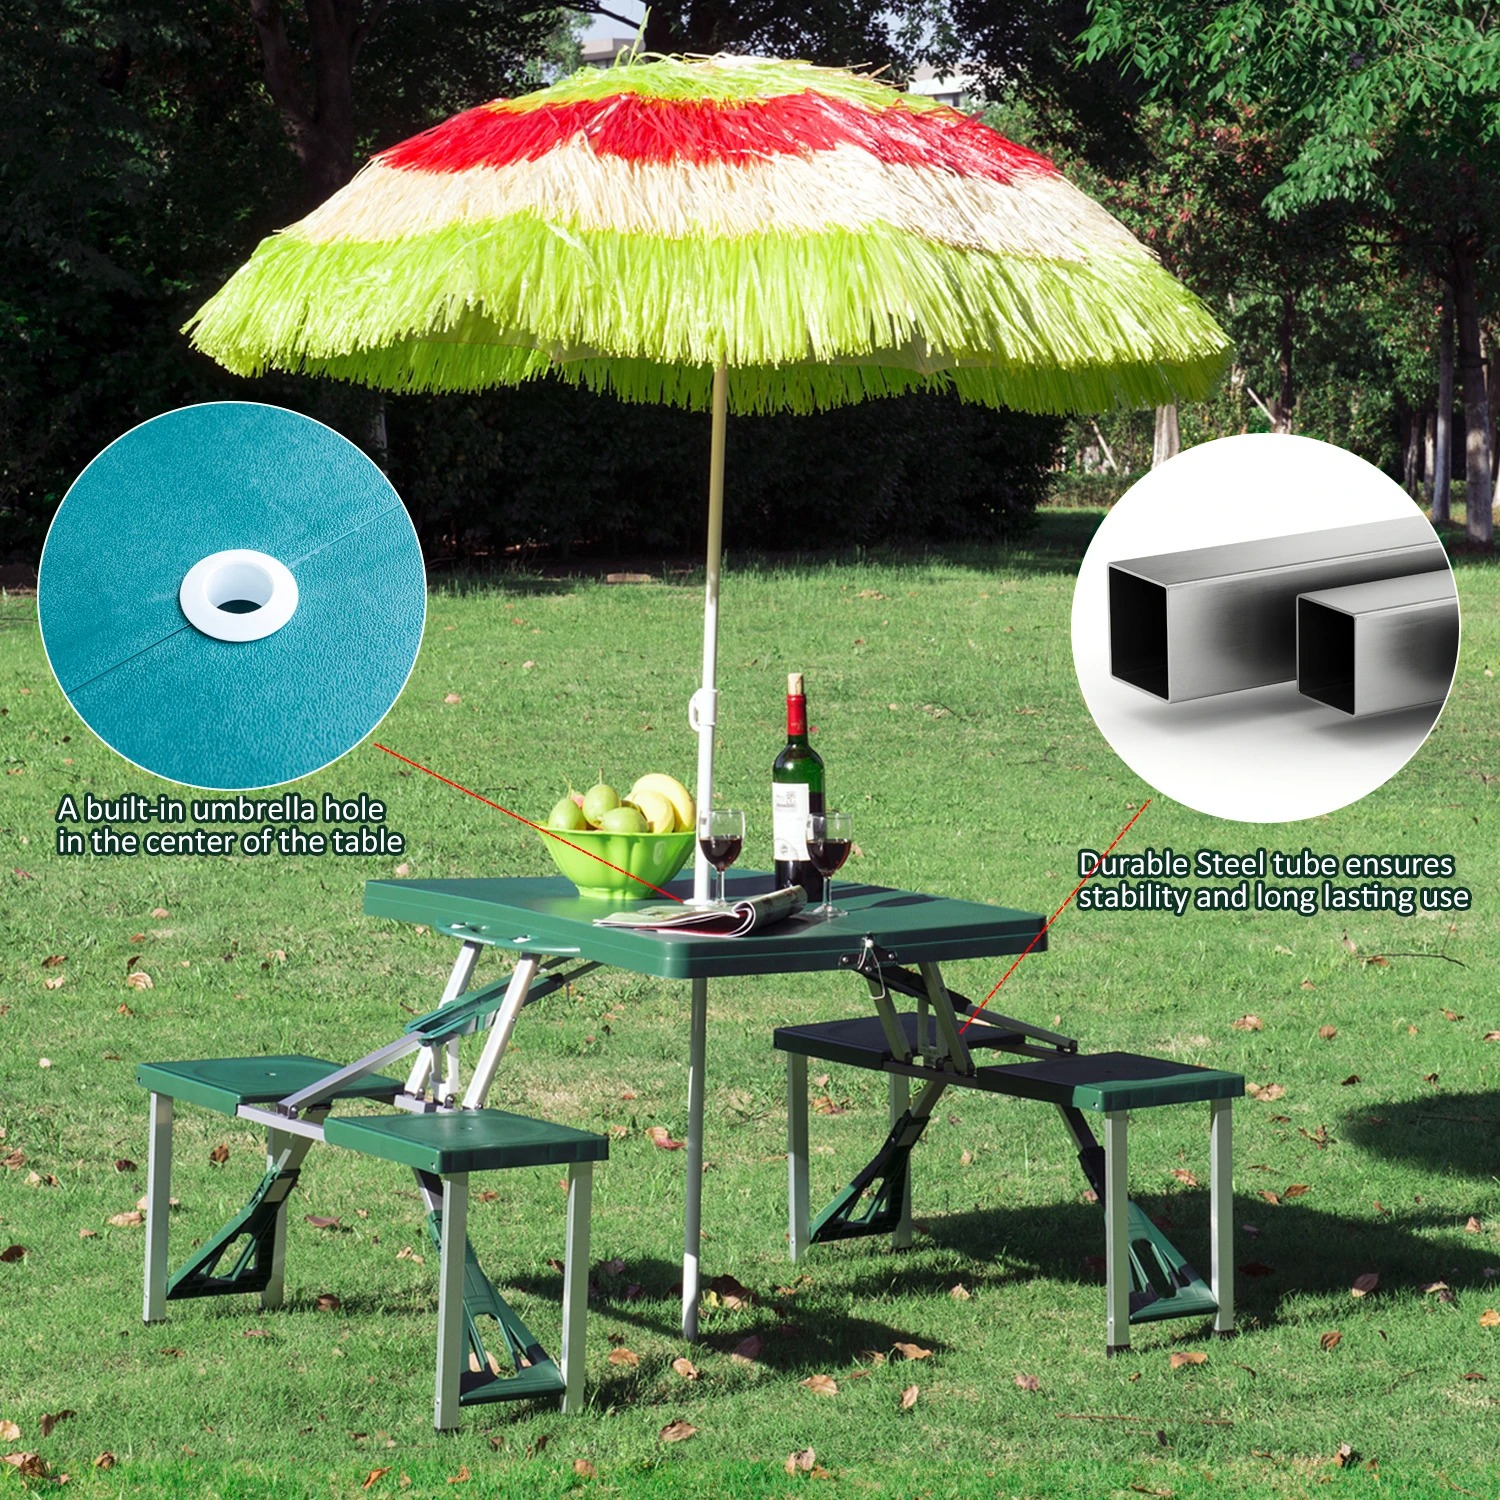 4 Person Plastic Portable Compact Folding Suitcase Picnic Table Set with Umbrella Hole - Green